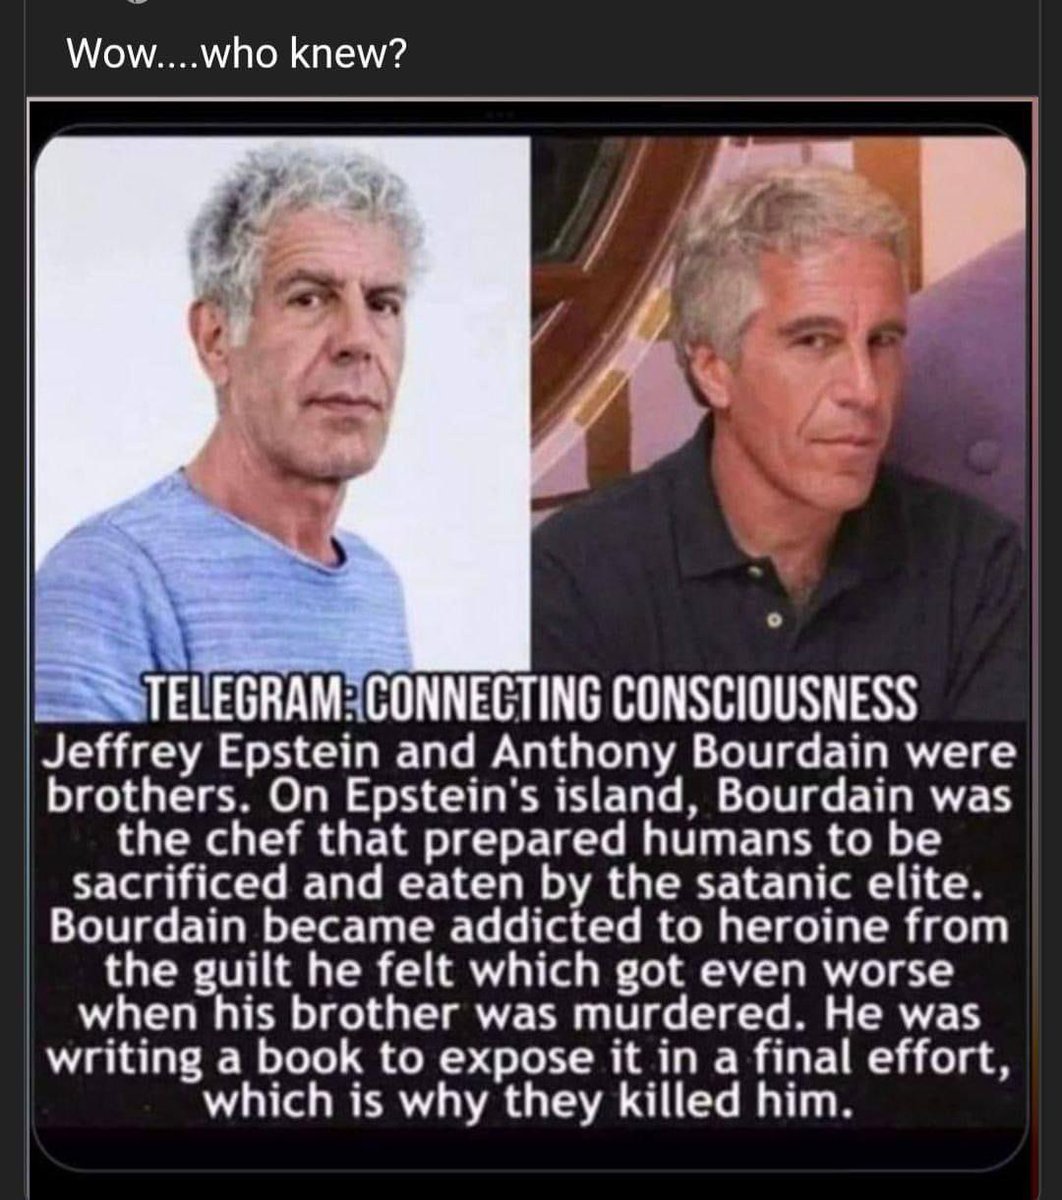 Wow…who knew?
 The Telegraph: Connecting Consciousness Jeffrey Epstein and Anthony Bourdain were brothers.
 On Epstein's Island Bourdain was the chef responsible for preparing humans to be sacrificed and eaten by the Satanic Elite

 Bourdain is addicted to the heroine because of